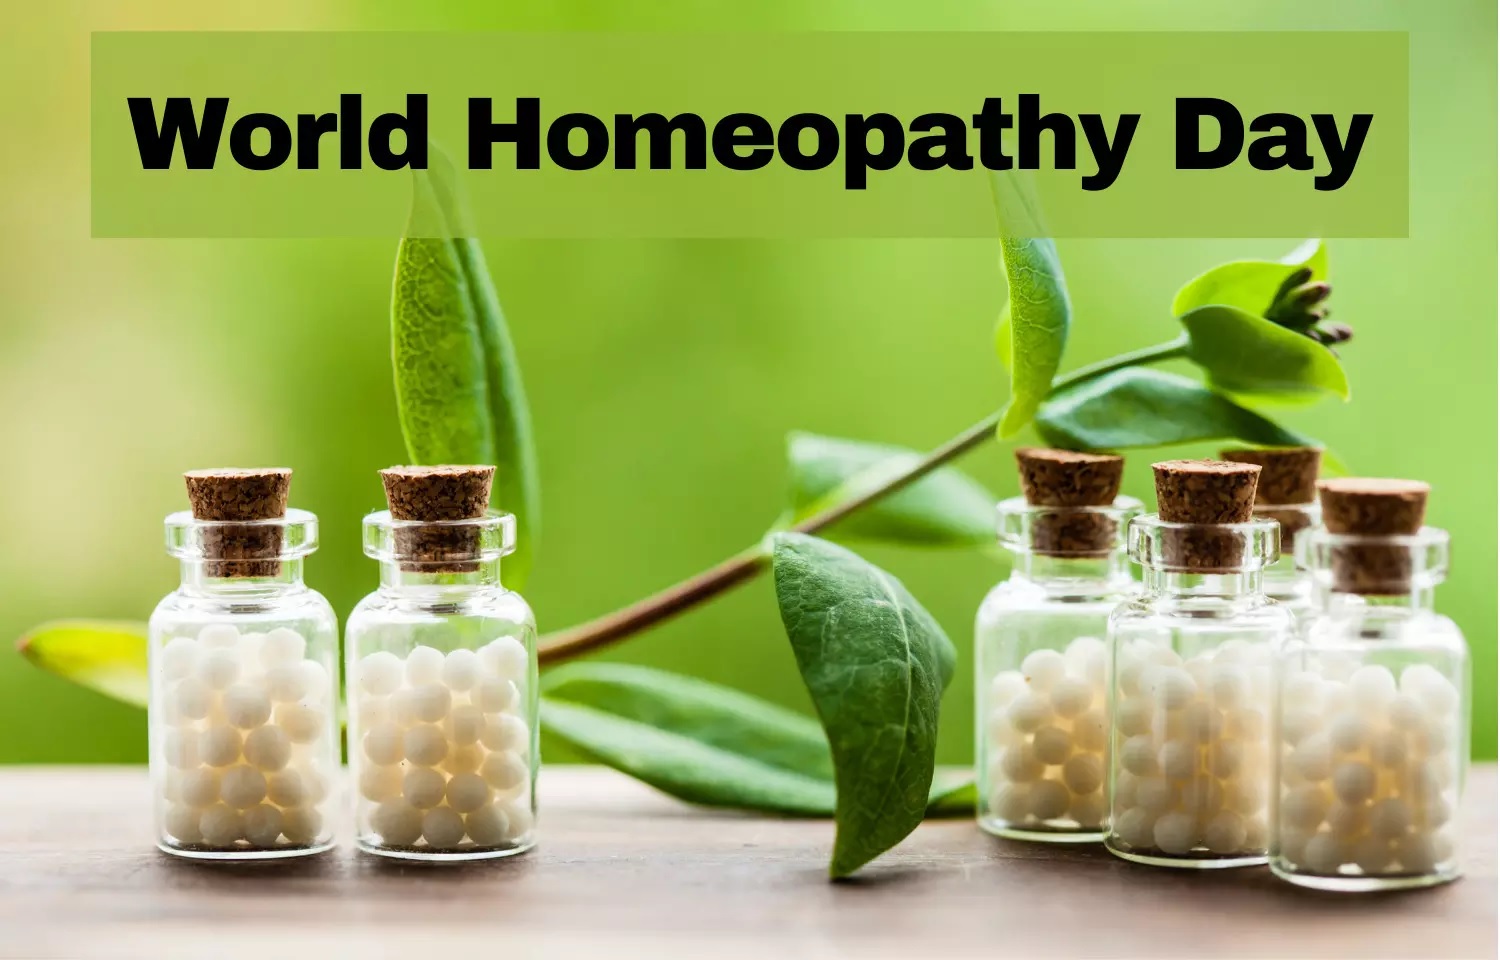 WORLD HOMEOPATHY DAY IN TAMIL 4